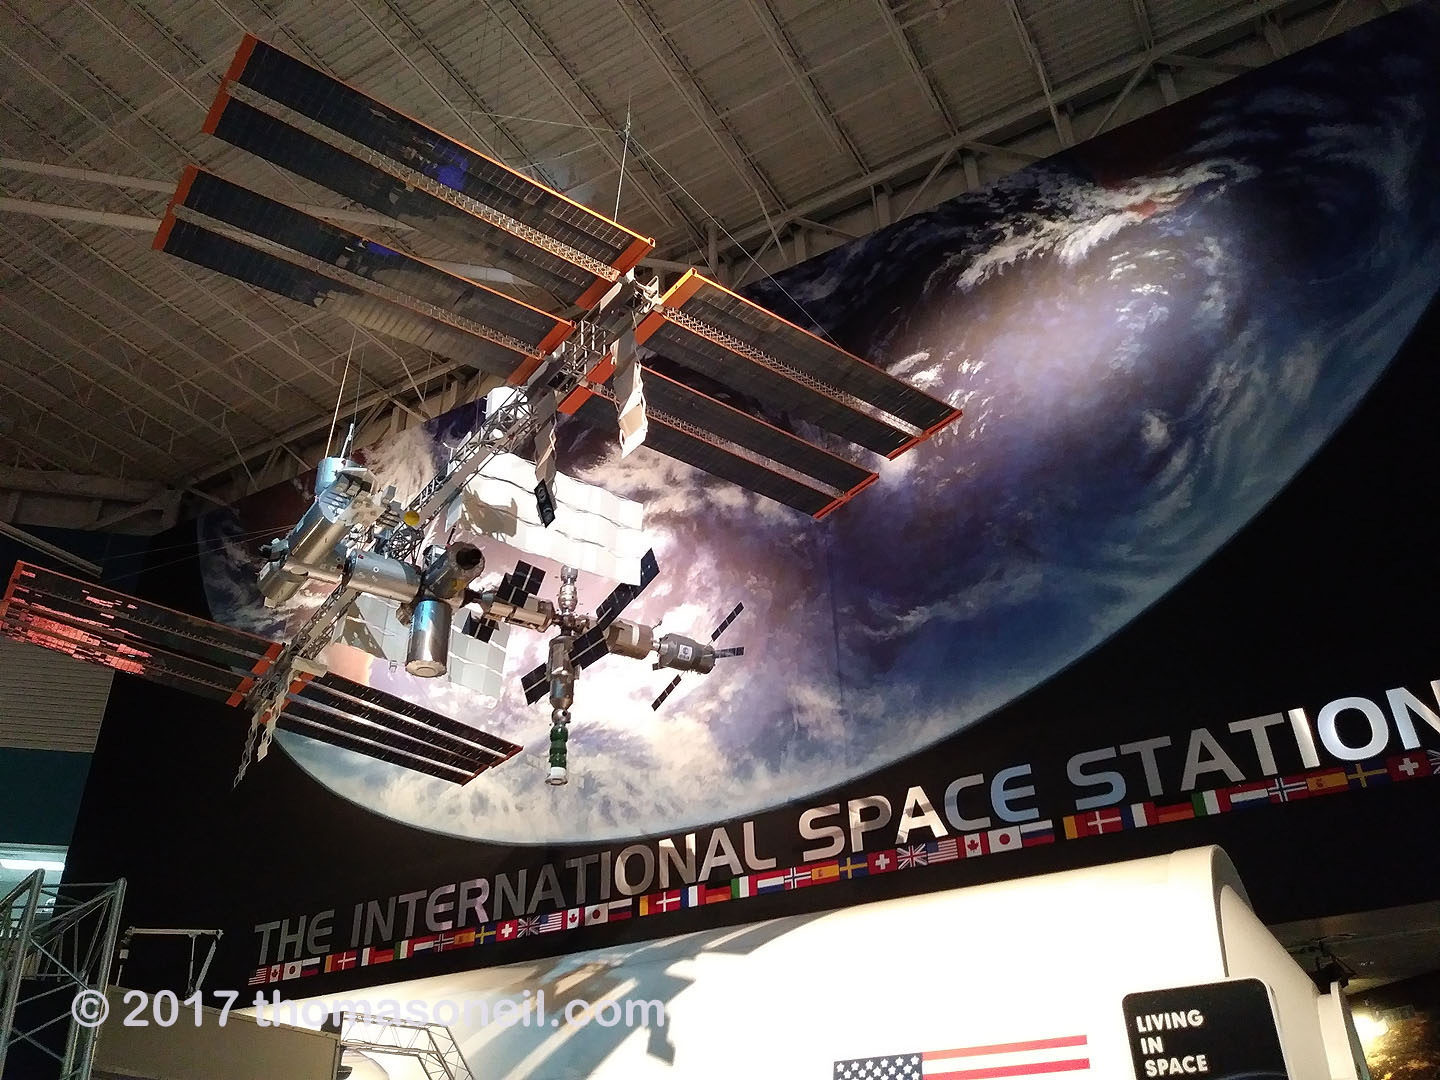 A depiction of the International Space Station, Johnson Space Center, Houston, 2017.  Click for next photo.